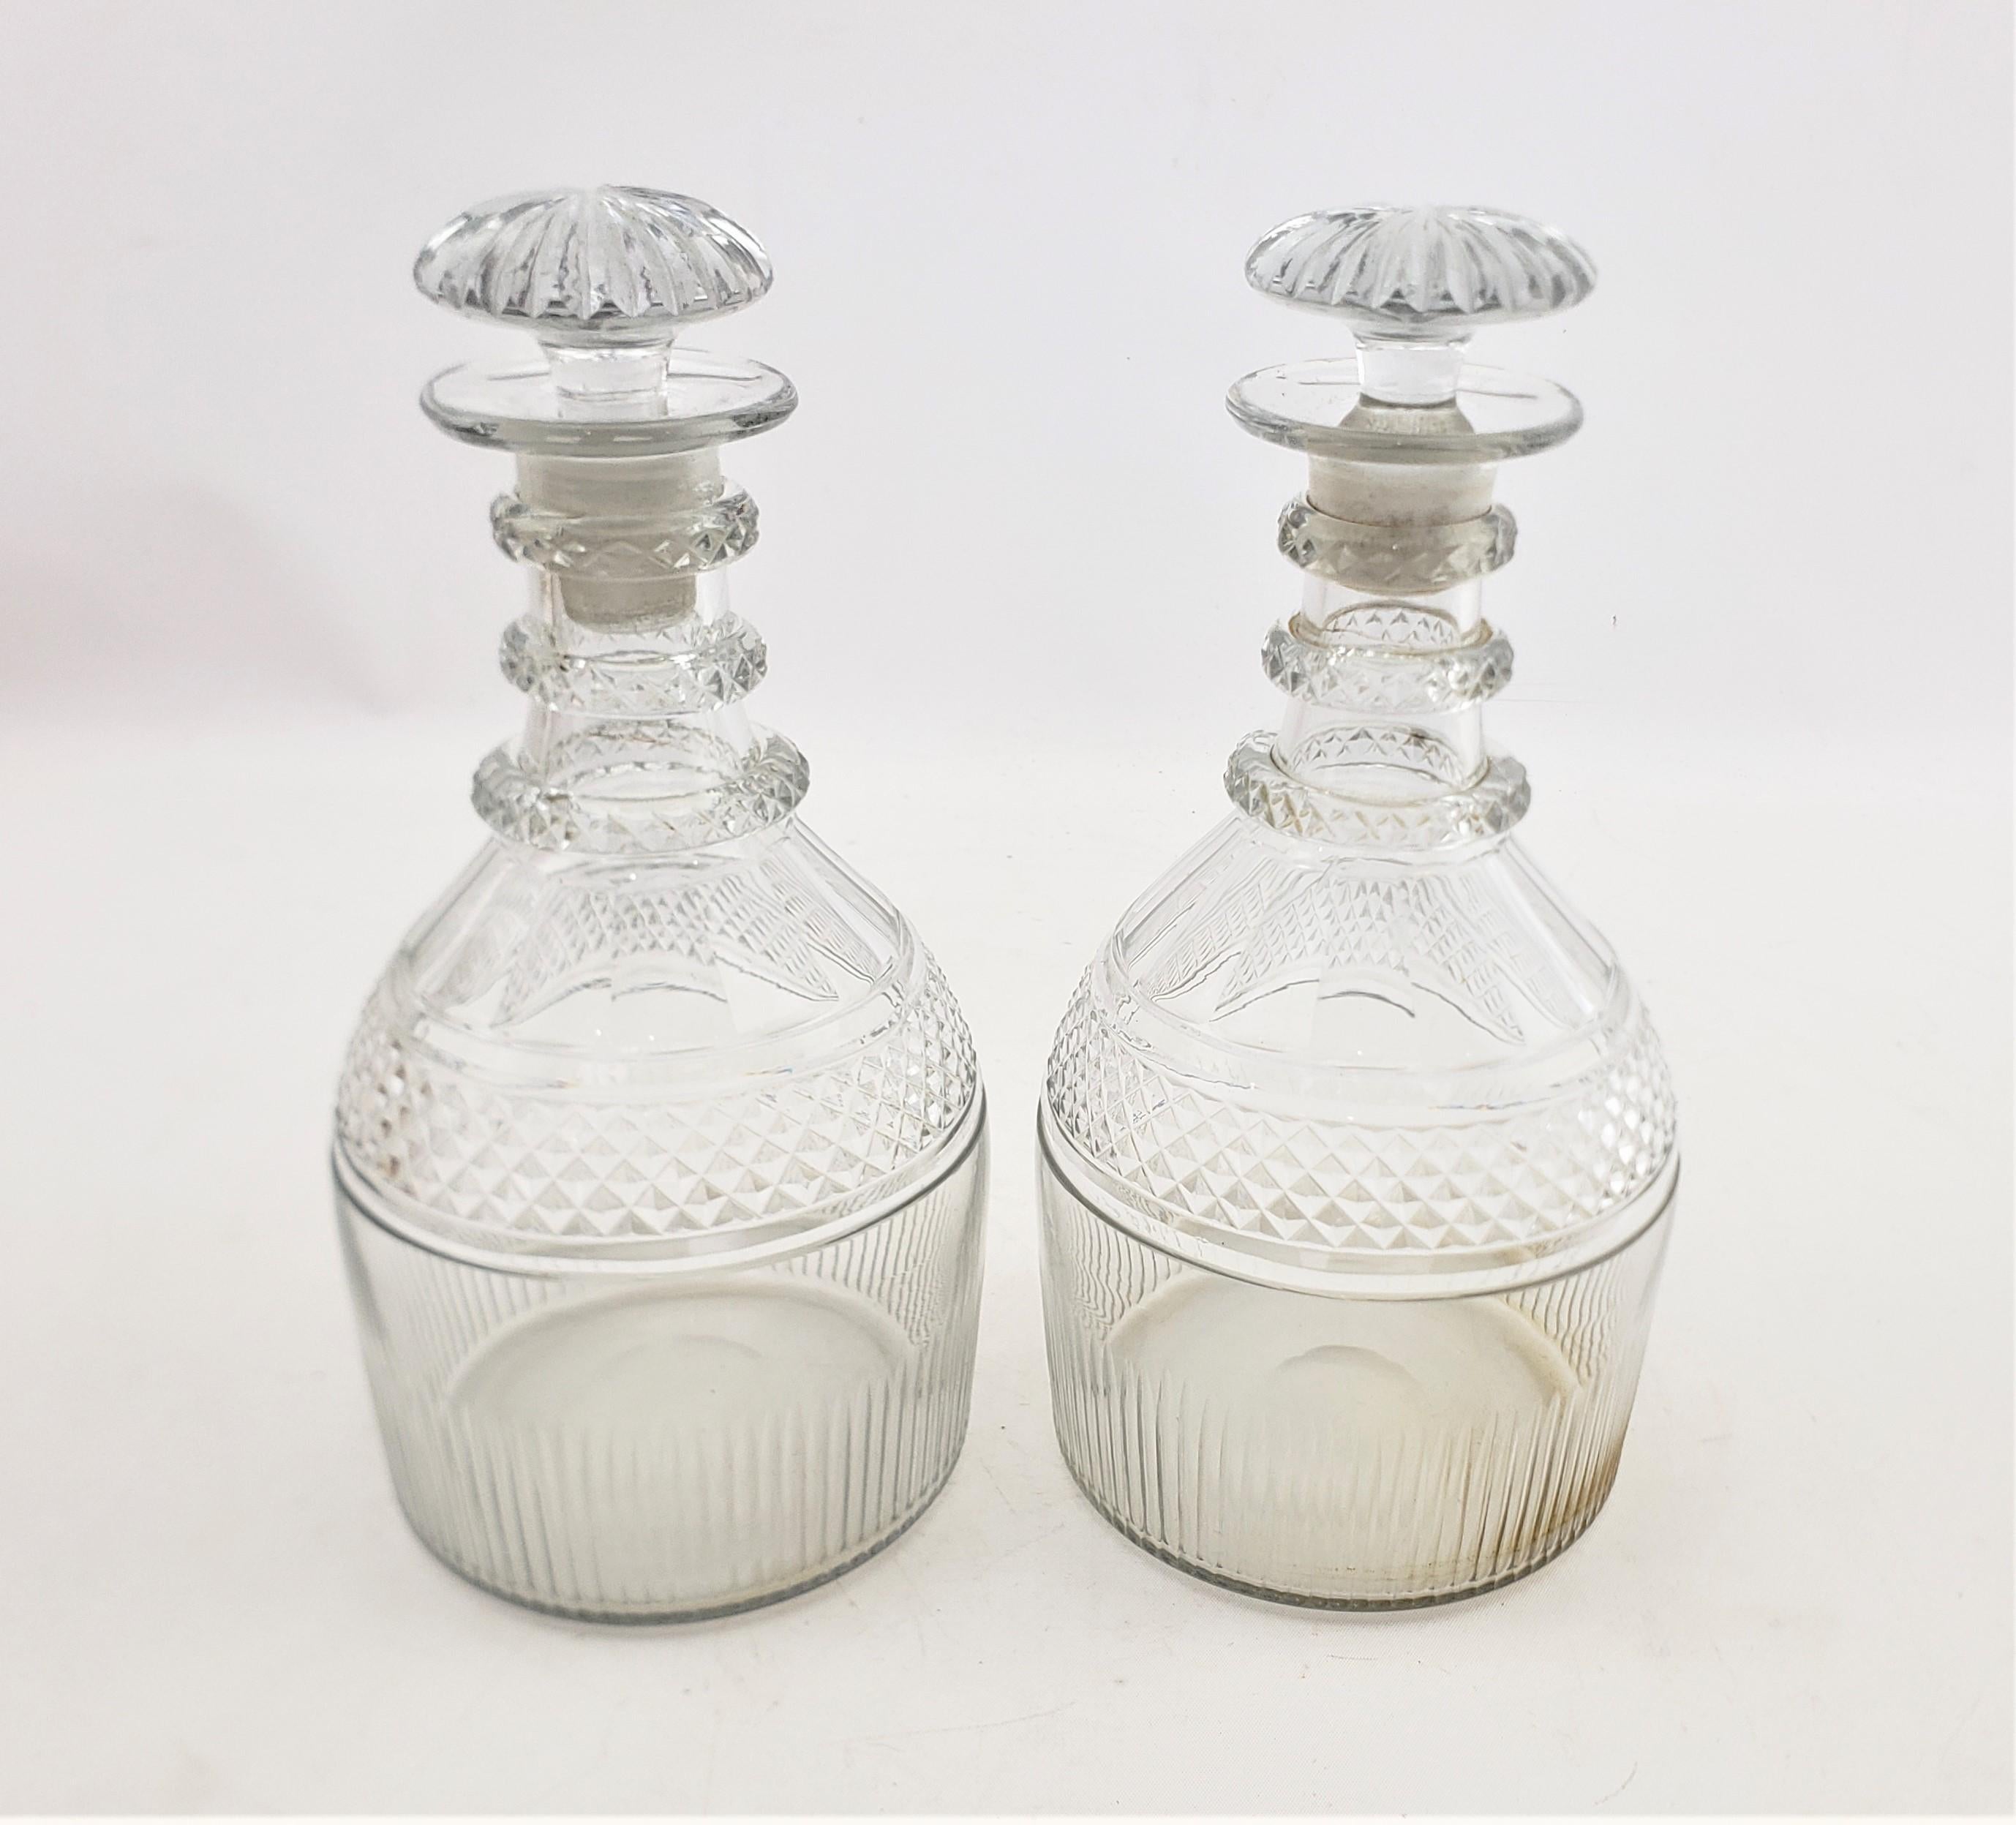 This pair of antique decanters are unsigned, but presumed to have originated from England and date to approximately 1825 and done in a period George III style. The decanters are done in clear glass with faceted mushroom stoppers and a three neck